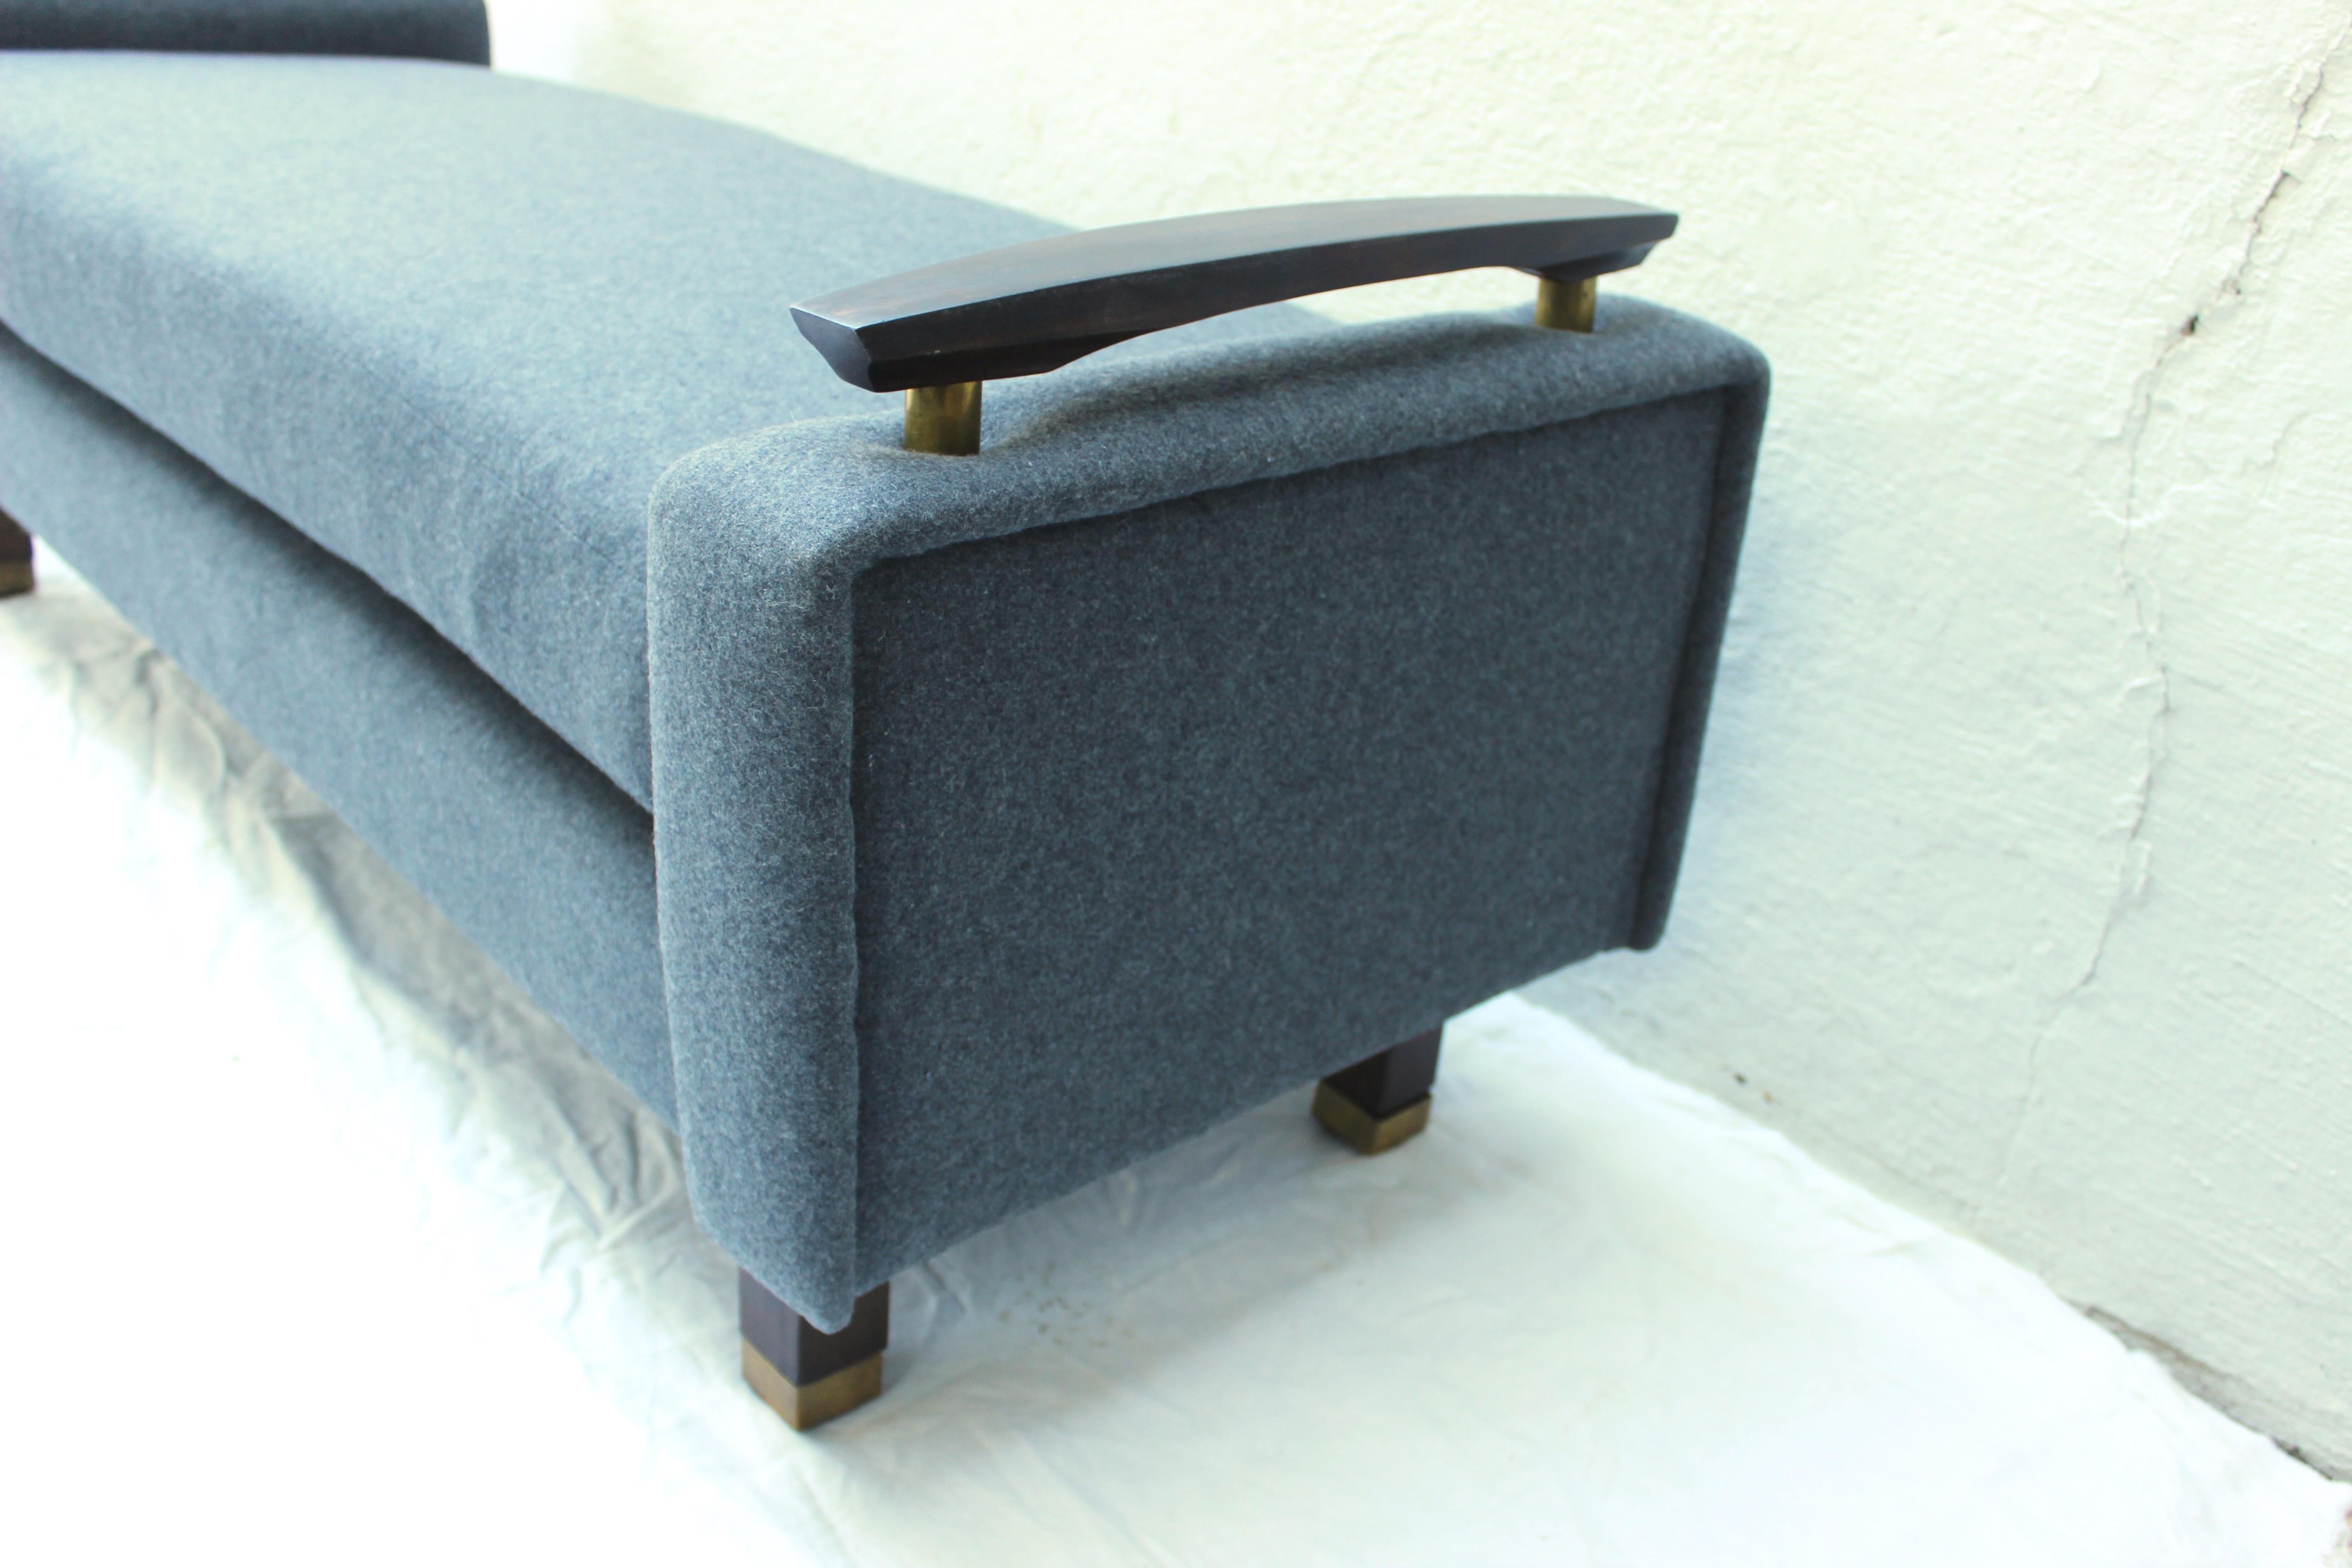 Modern French deco floating arm bench with walnut and brass details.
Newly upholstered in Grey Cashmere/wool.